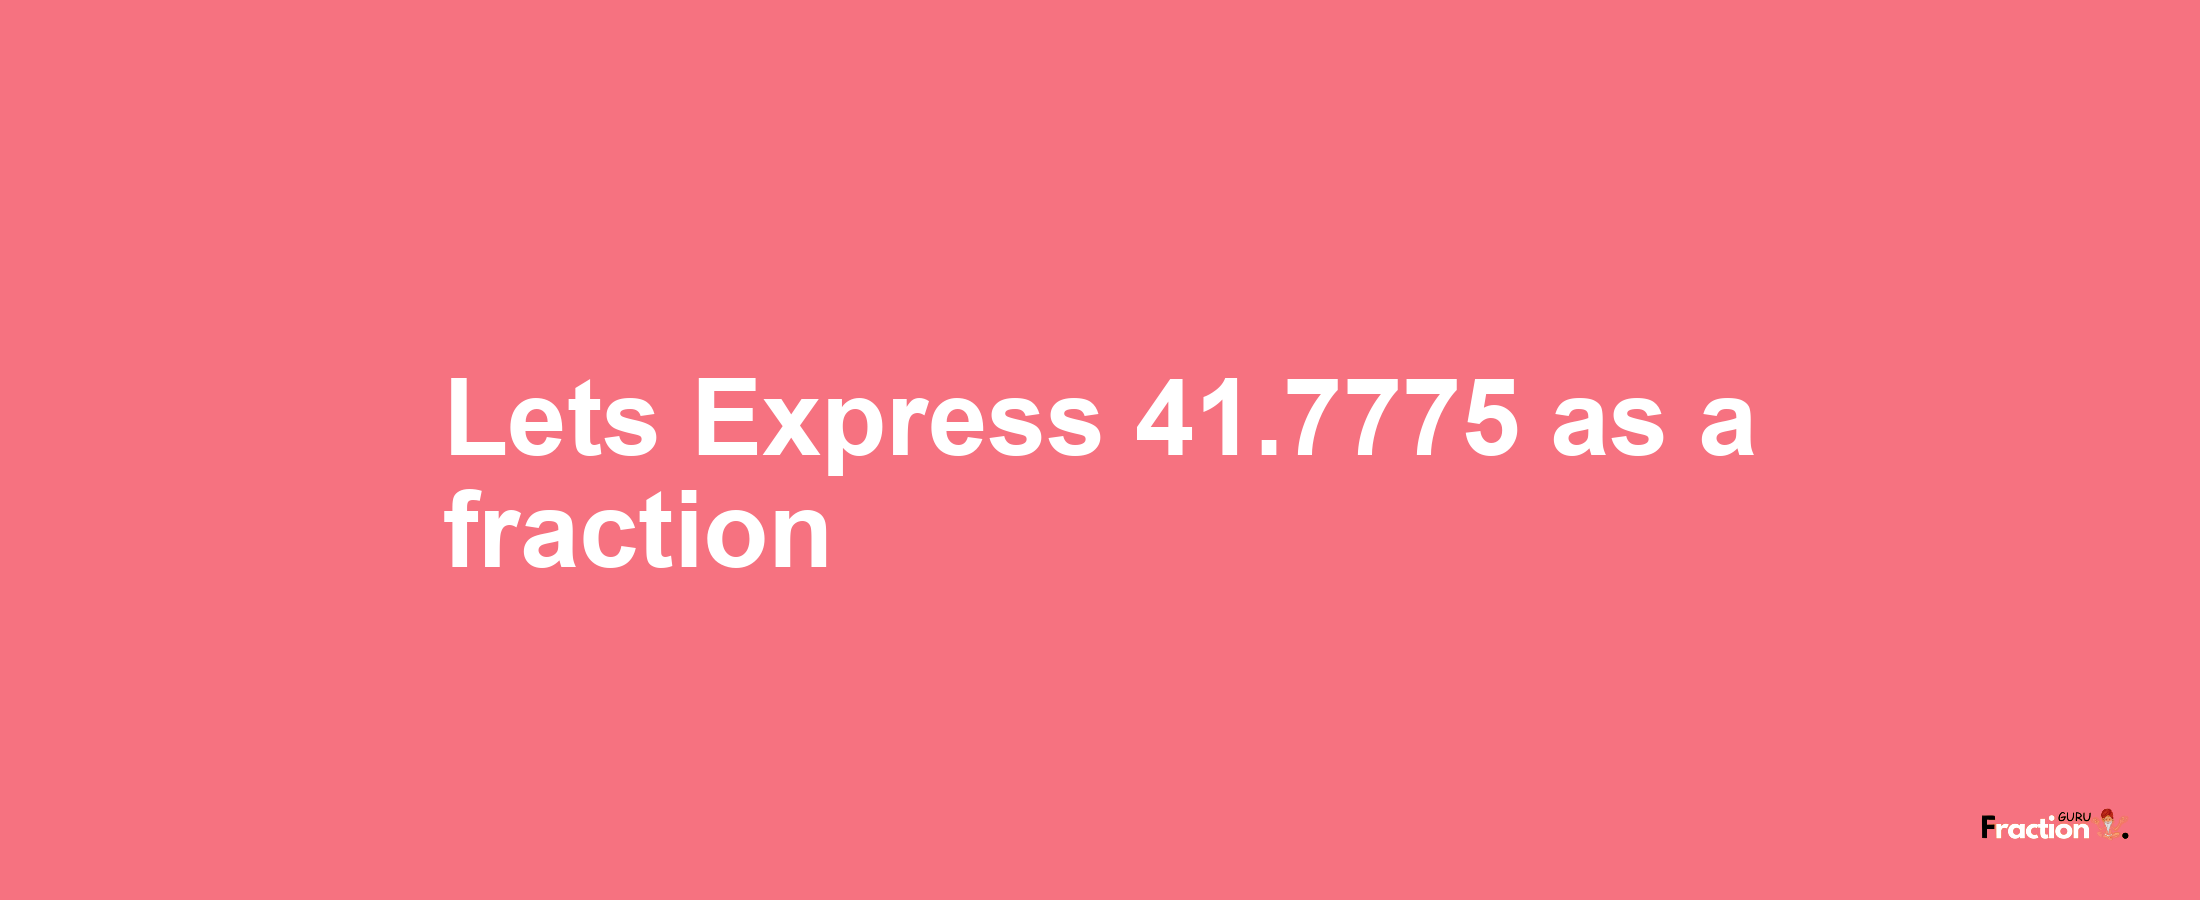 Lets Express 41.7775 as afraction